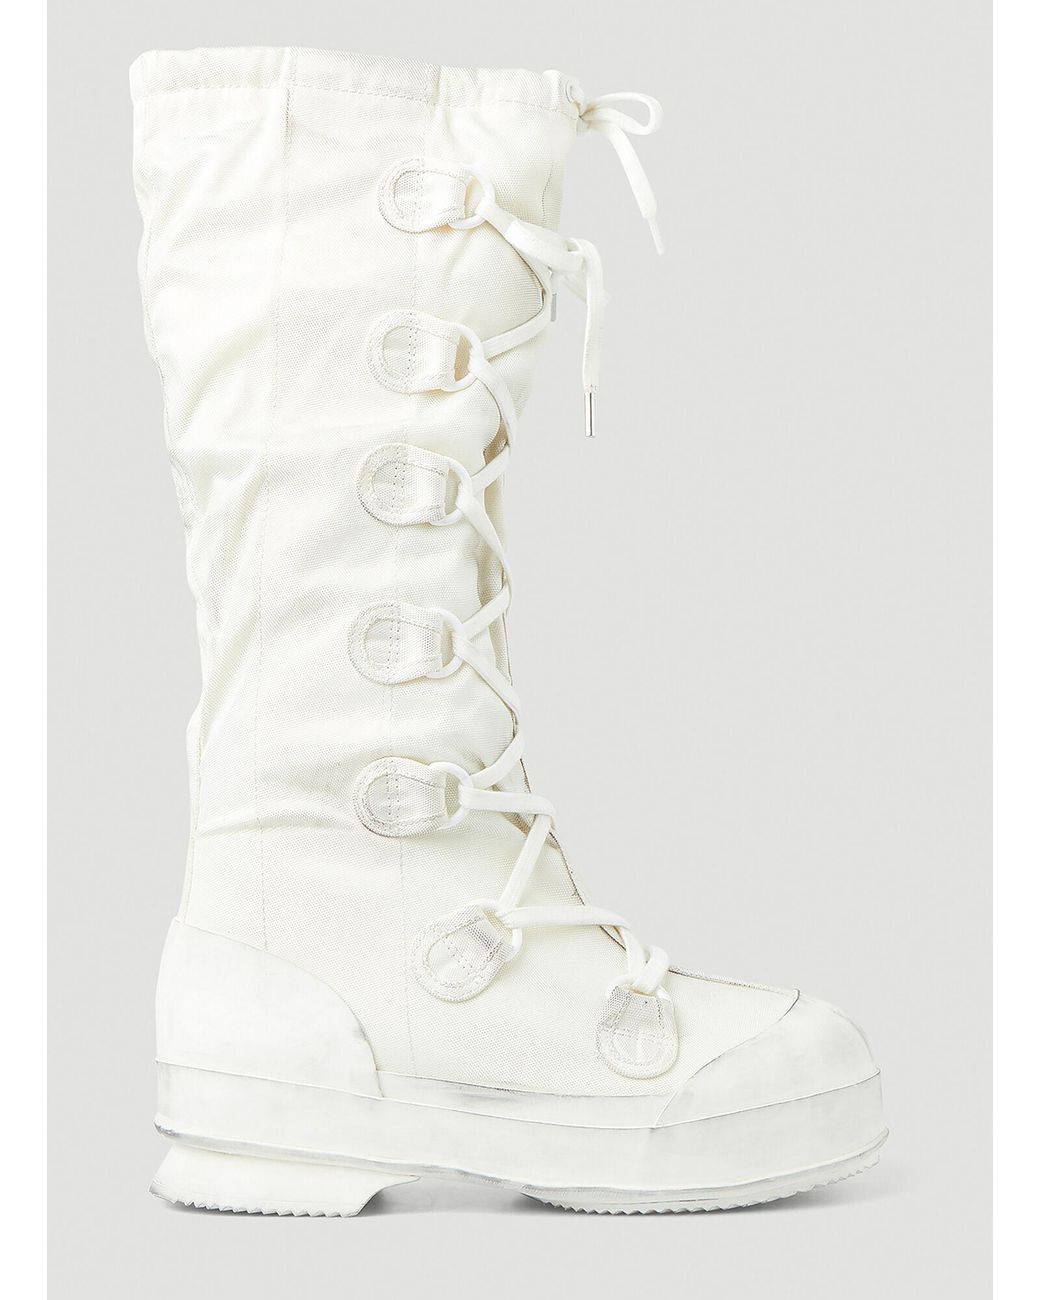 Acne Studios Tall Combat Boots in White | Lyst